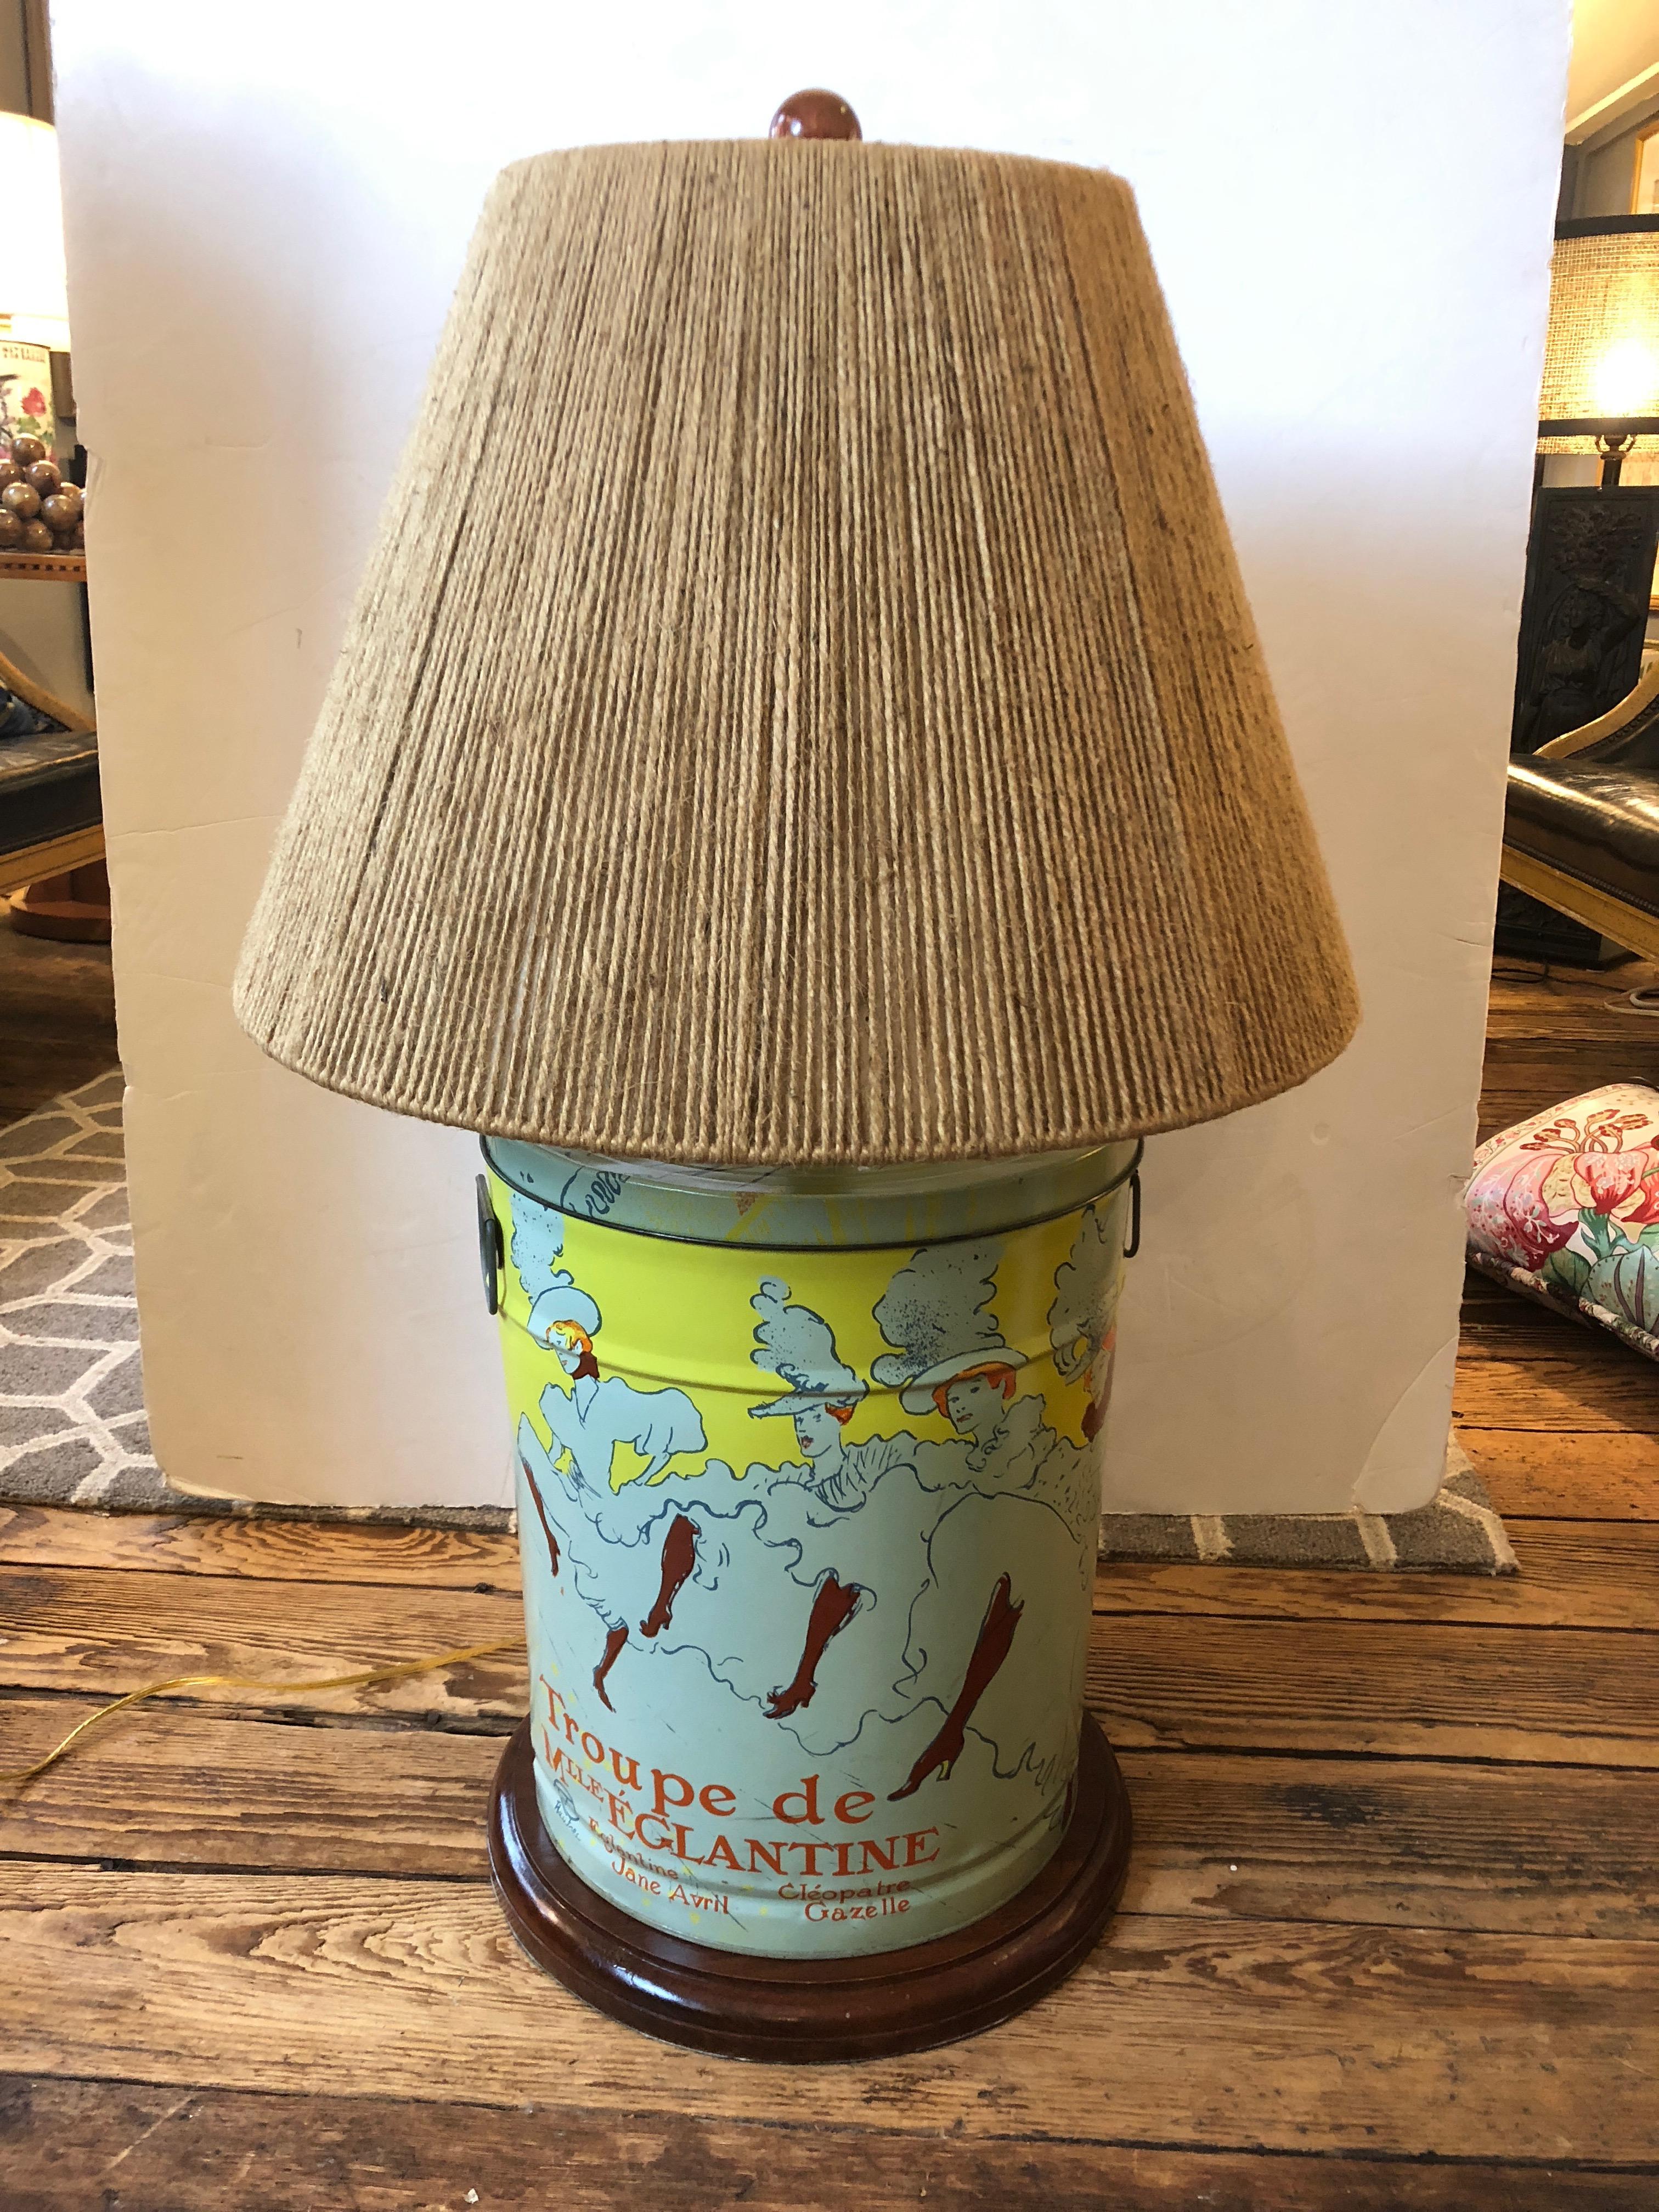 A wonderful pair of chunky tin canister lamps decorated in a pastel colored reproduction of the famous French artist Toulouse Lautrec. Originally vintage popcorn cans. Red headed dancers and graphic French words commingle in a palette of celadon